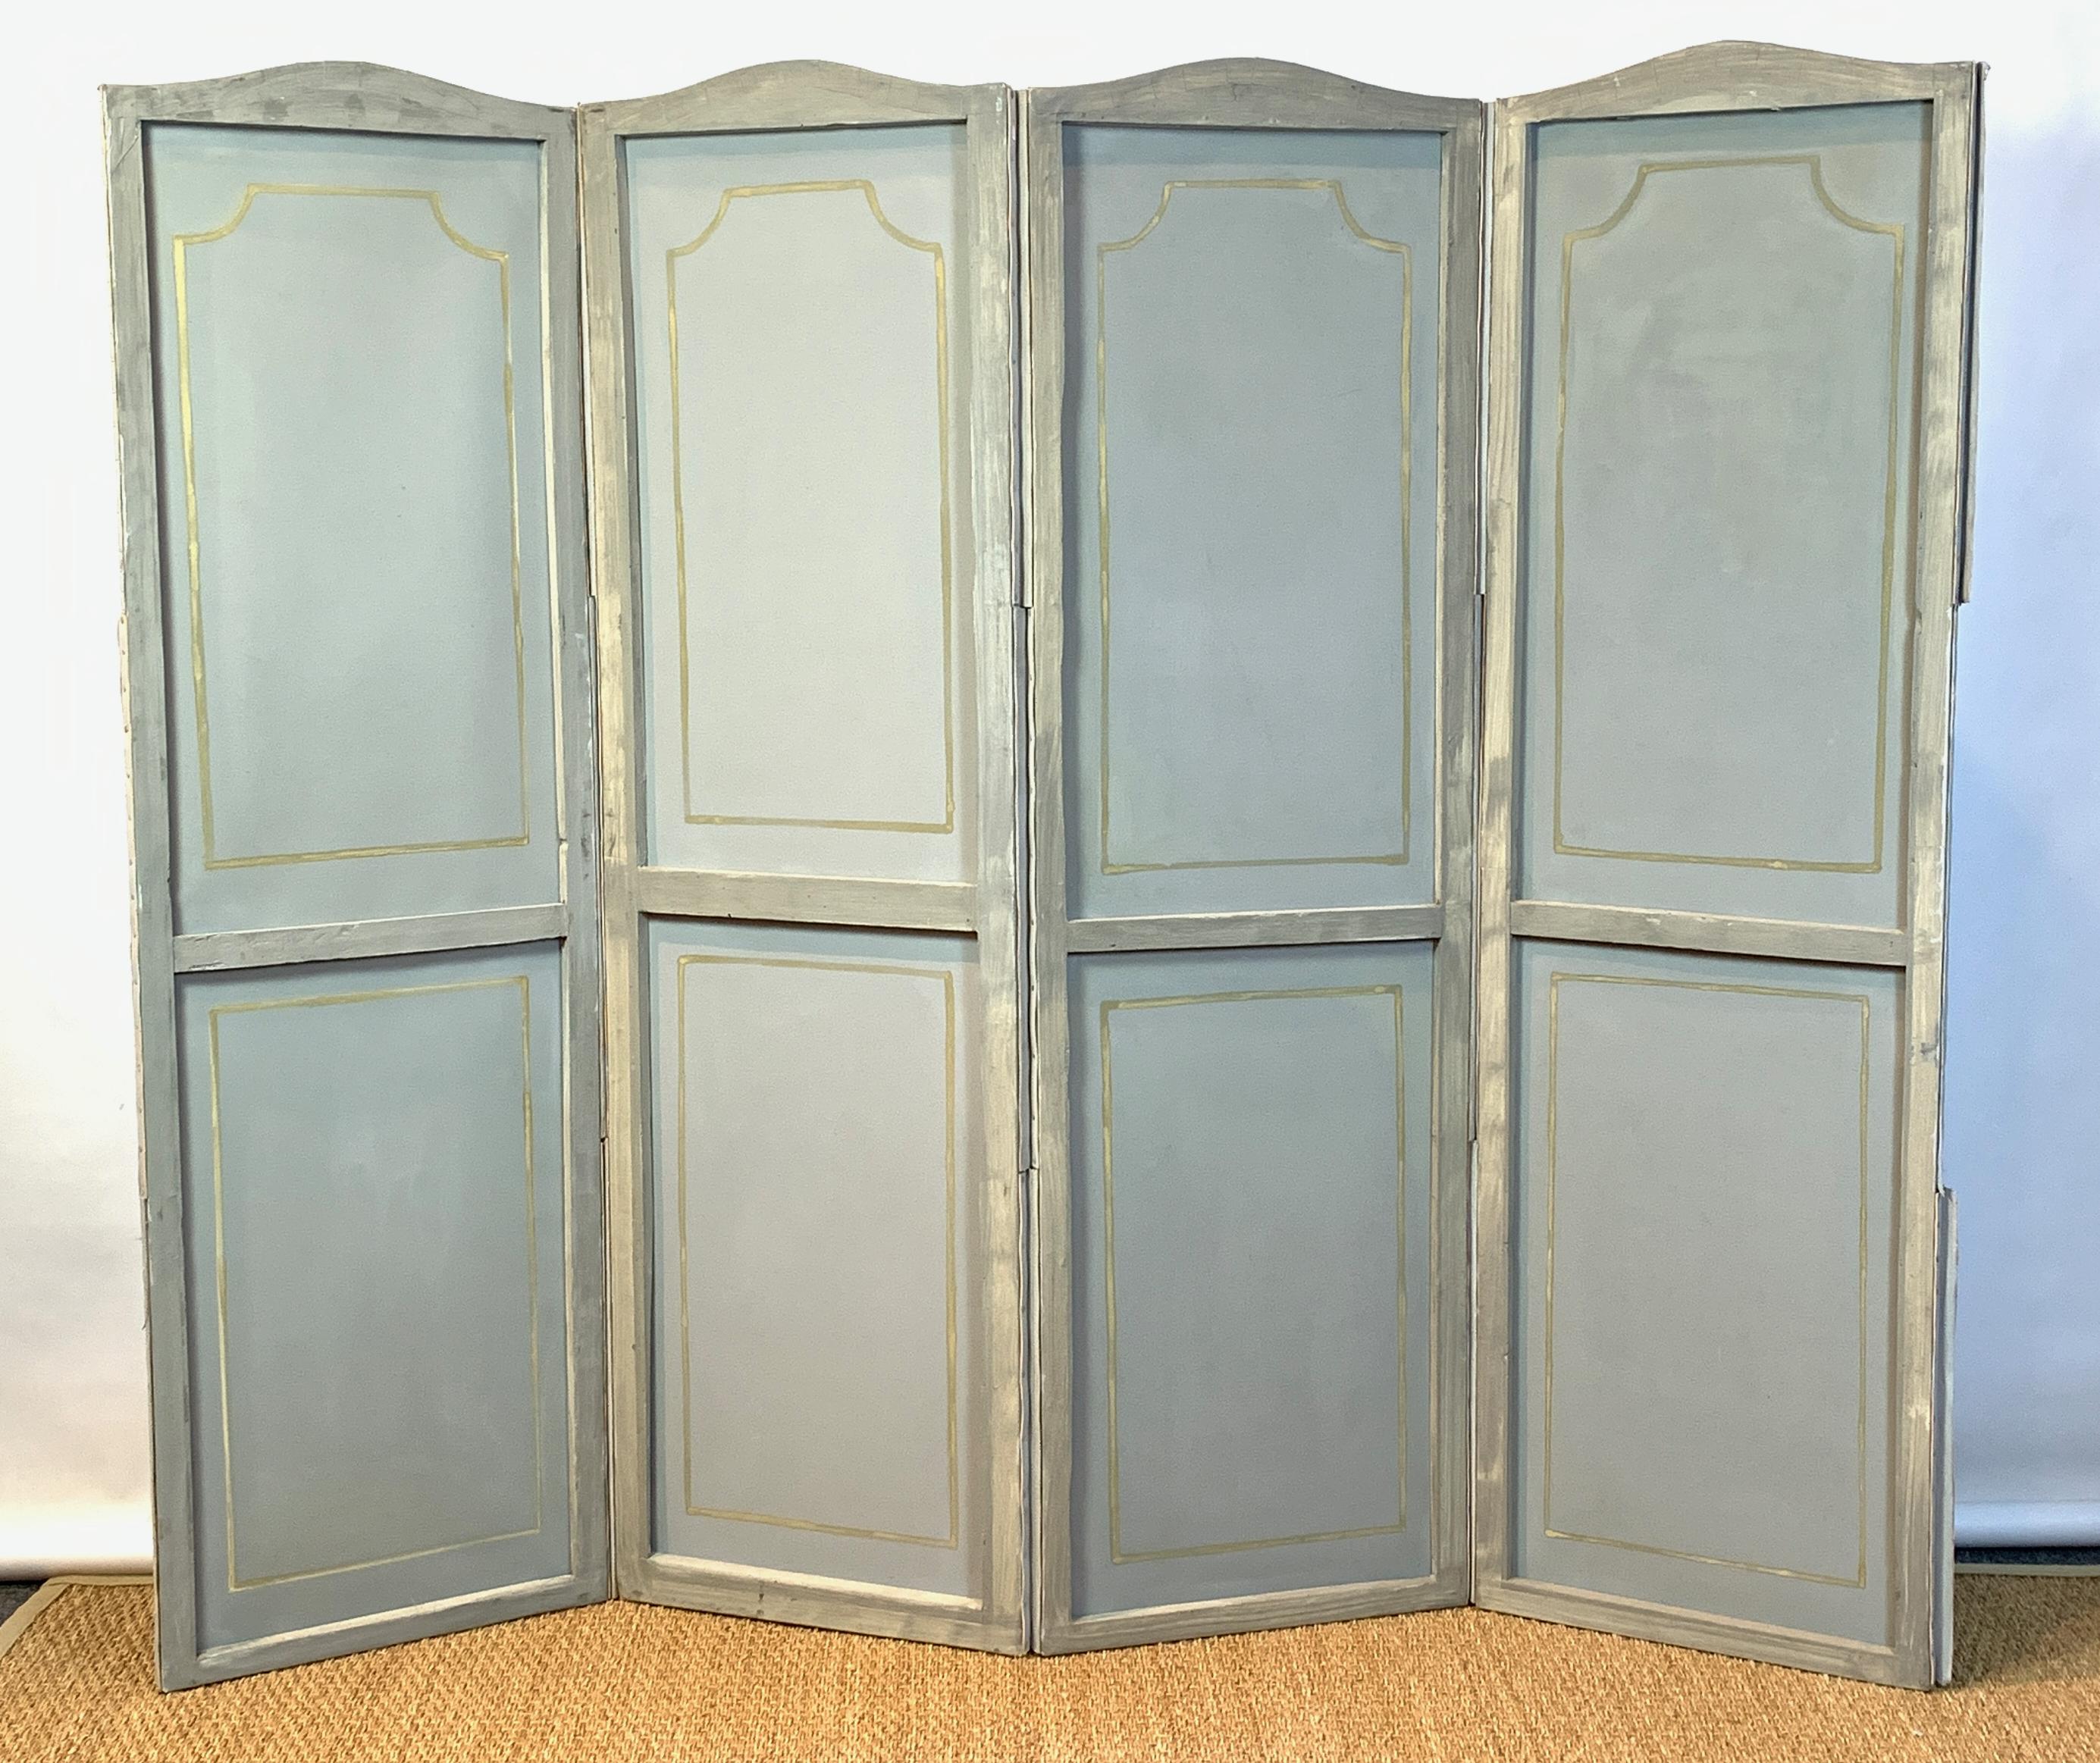 Hand Painted Four Panel Folding Screen in the Style of Gracie or de Gournay 5